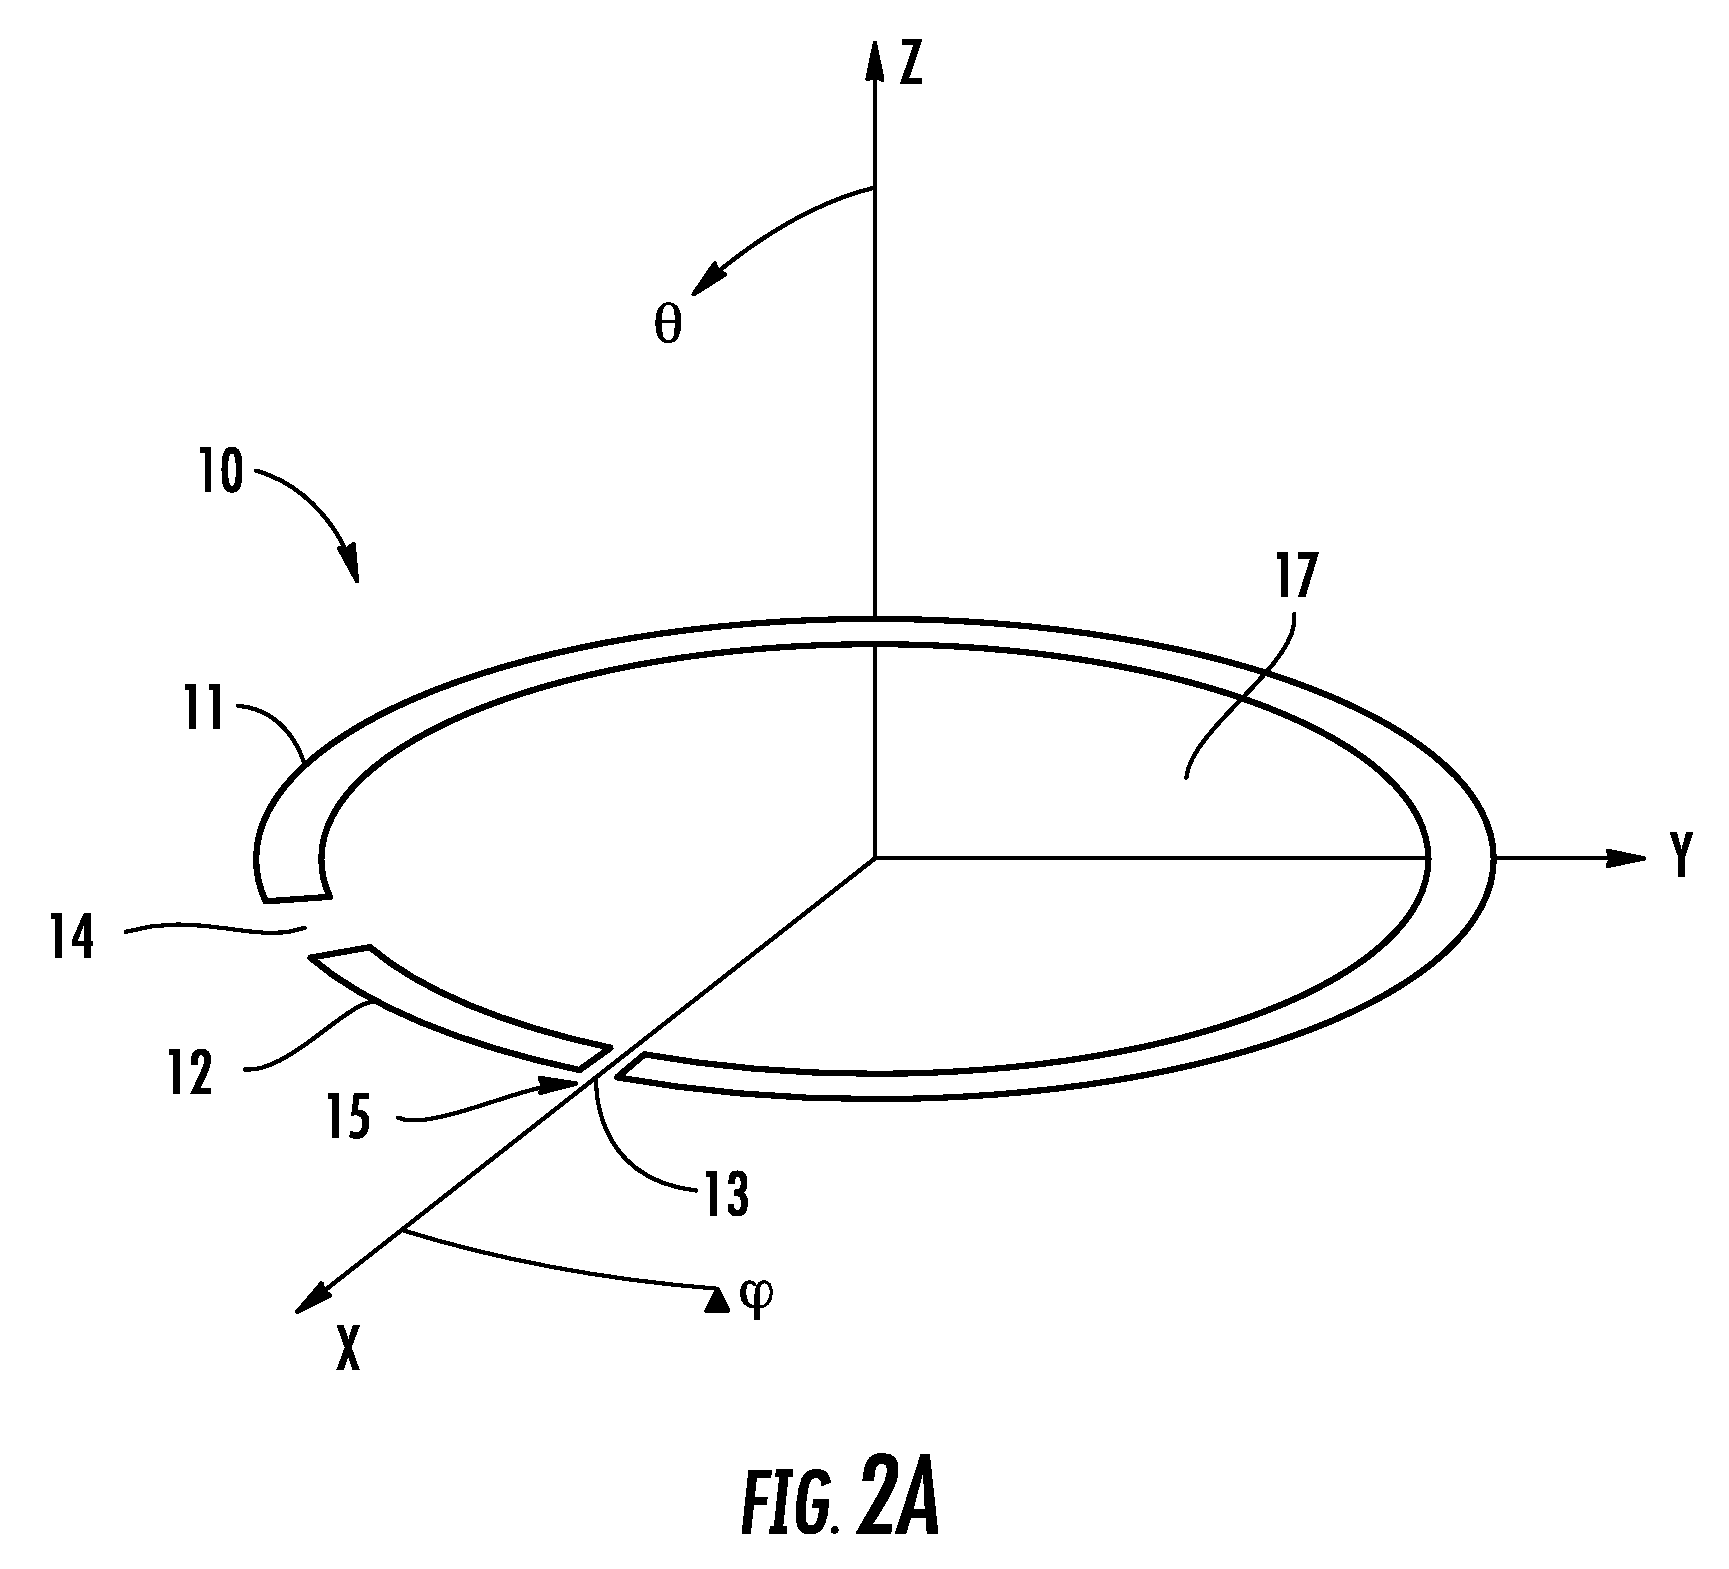 Loop antenna including impedance tuning gap and associated methods